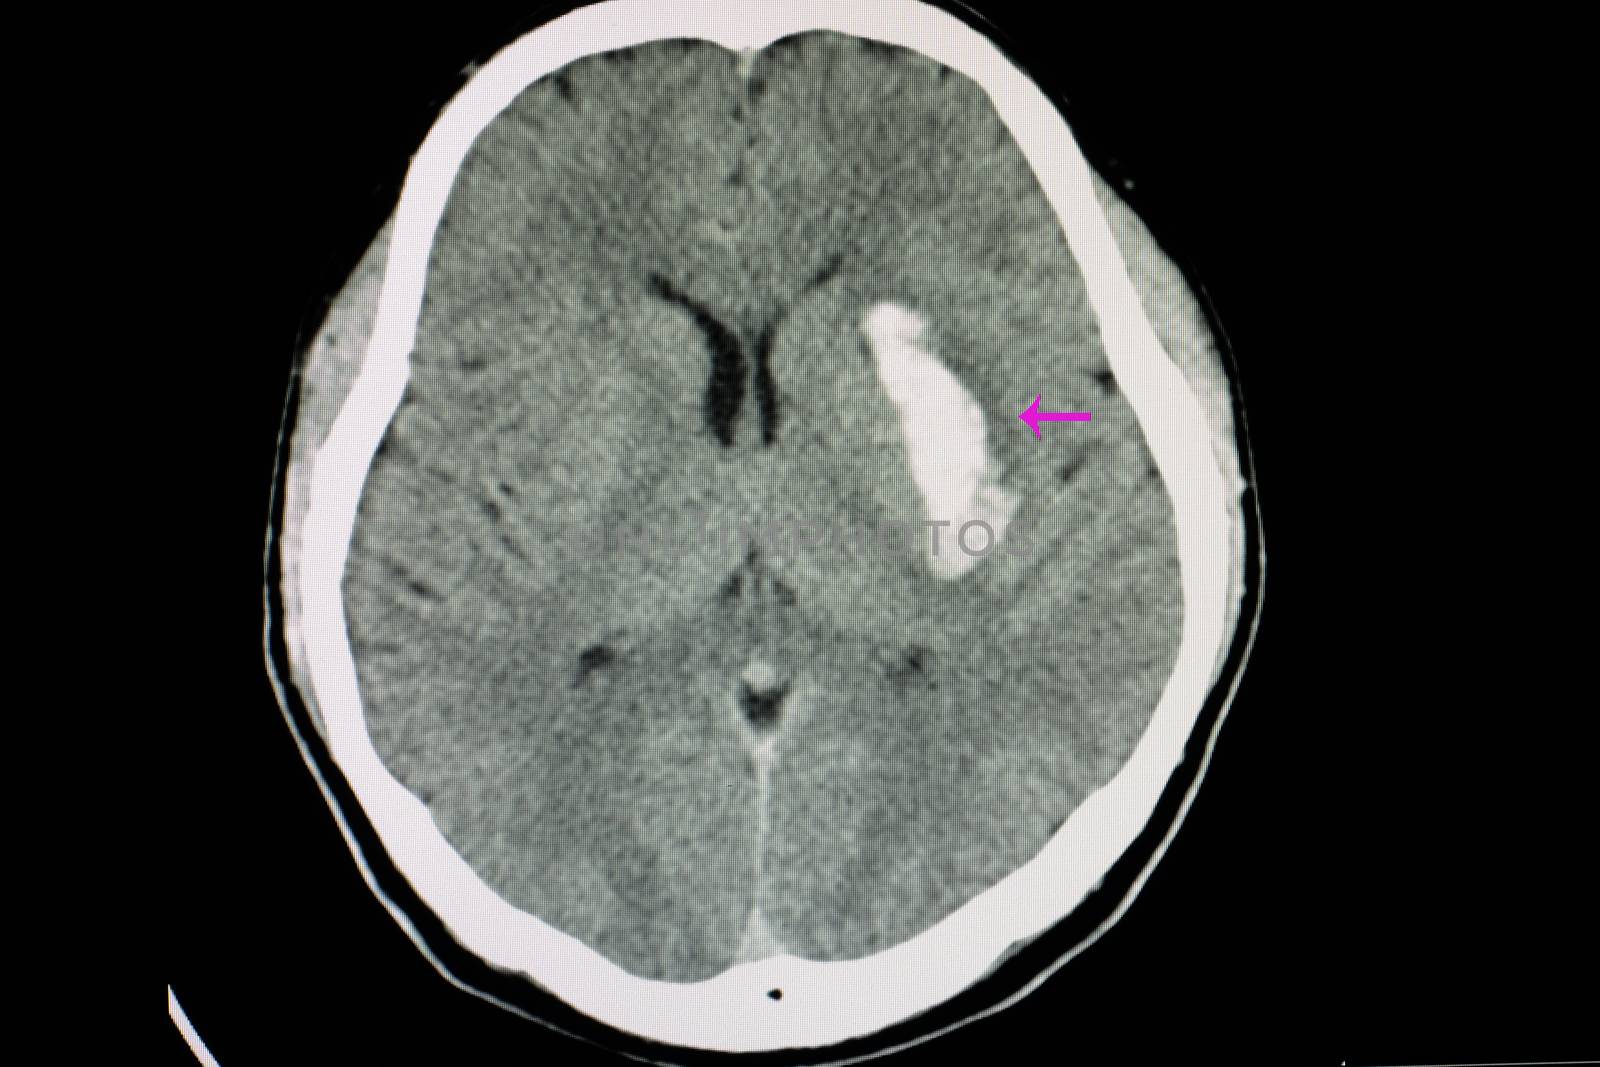 CT scan of a brain of a patient with intracerebral hemorrhage from stroke with bleeding in left internal capsule